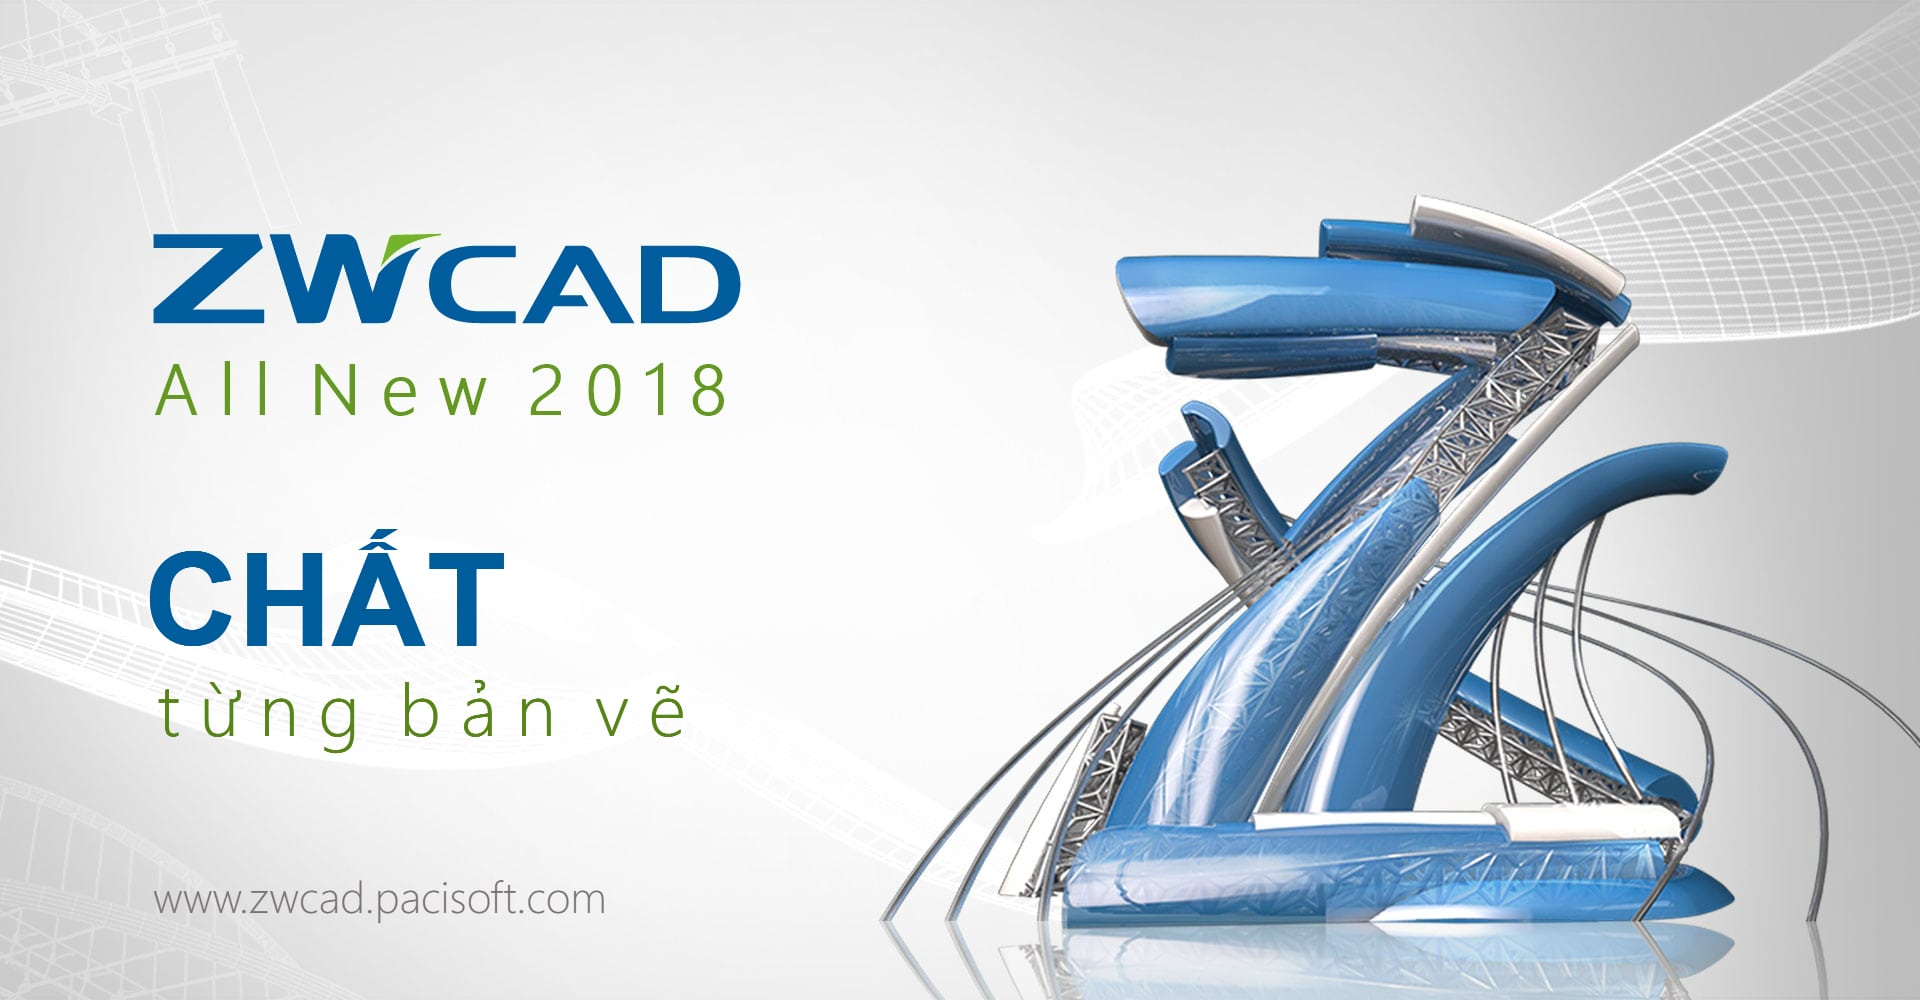 Promotion of ZWCAD 2018 with CAD Pockets